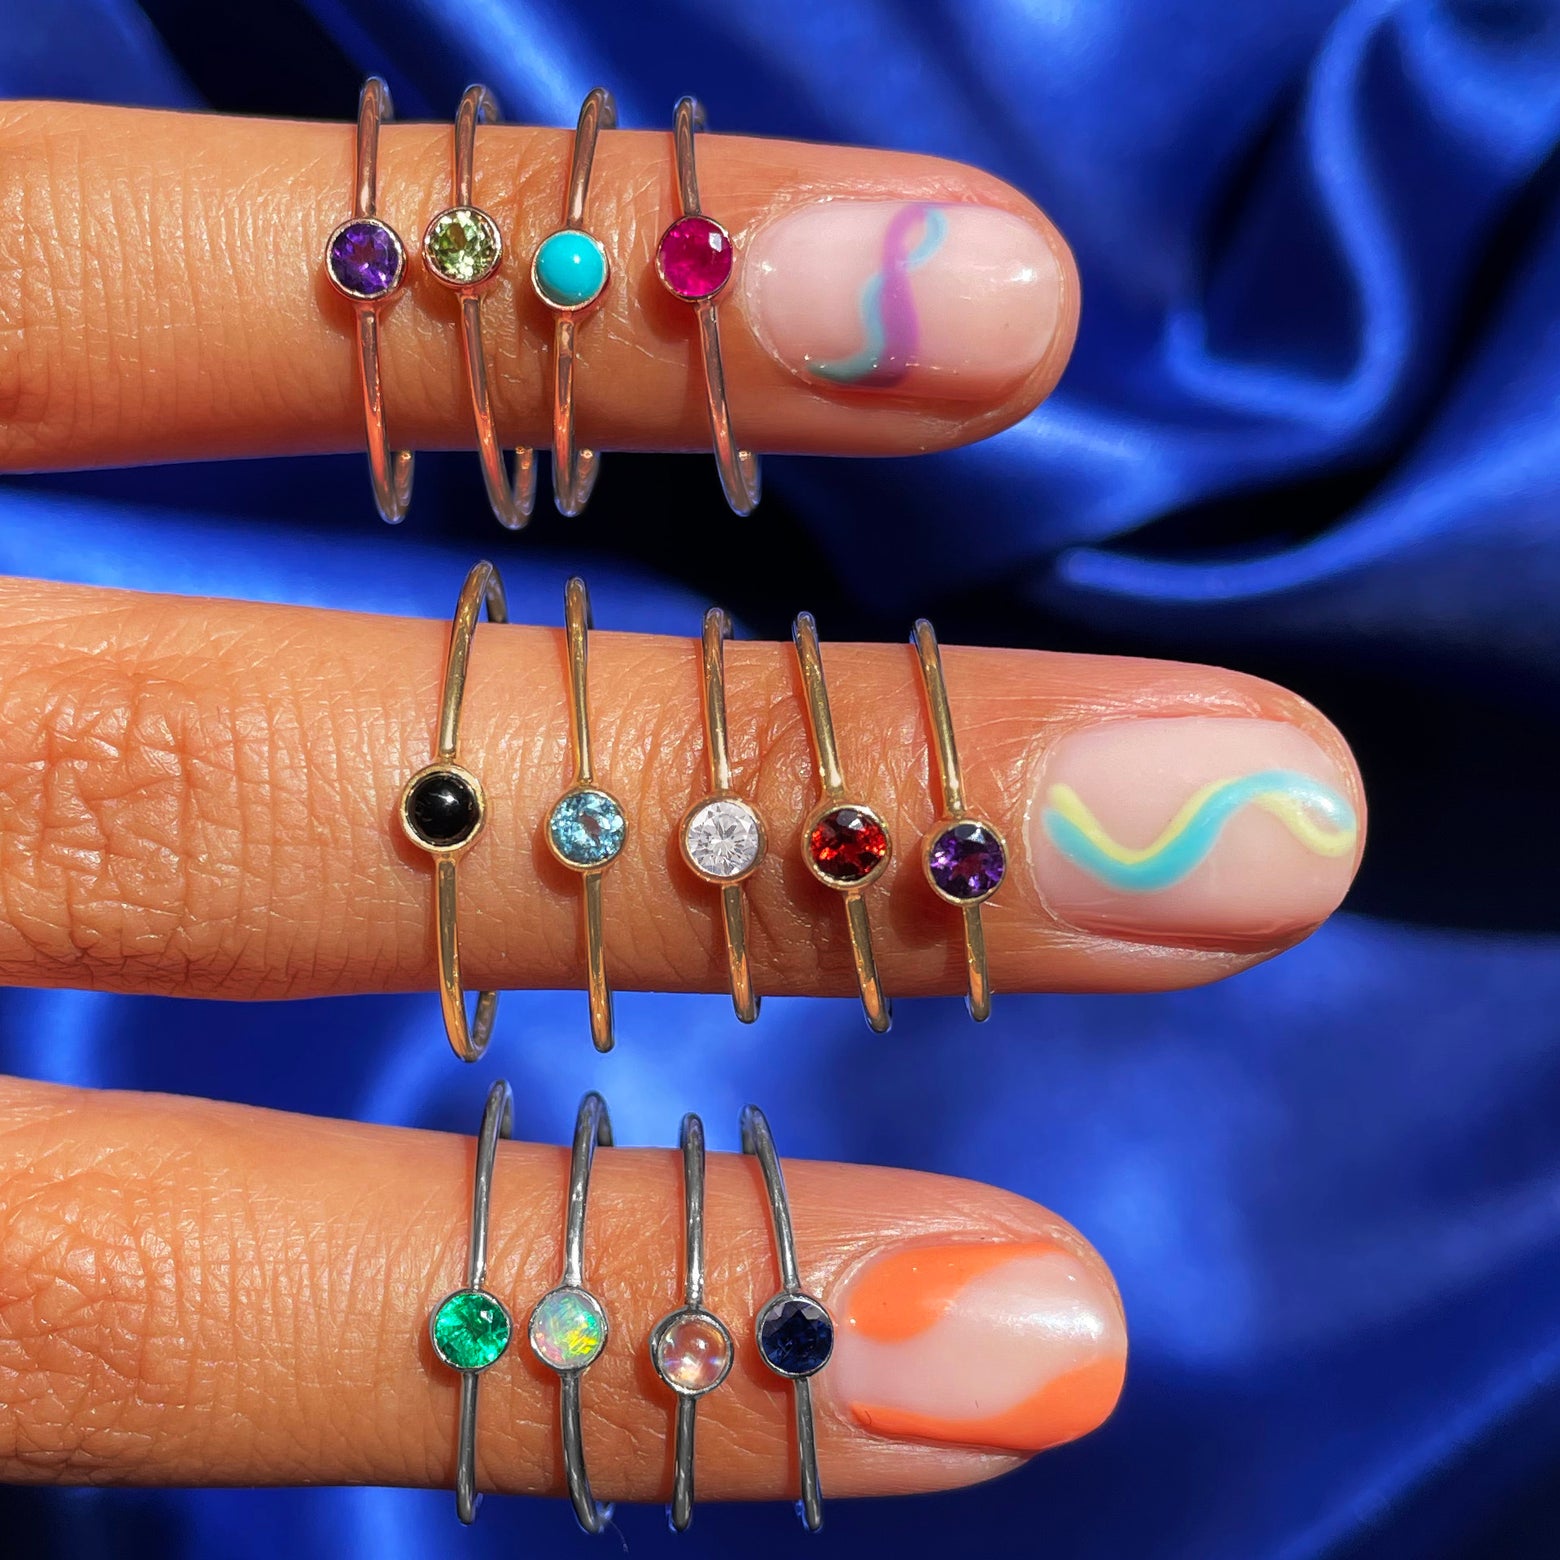 Three fingers with colorful wavy nail polish wearing various Automic Gold rings including a Diamond Ring